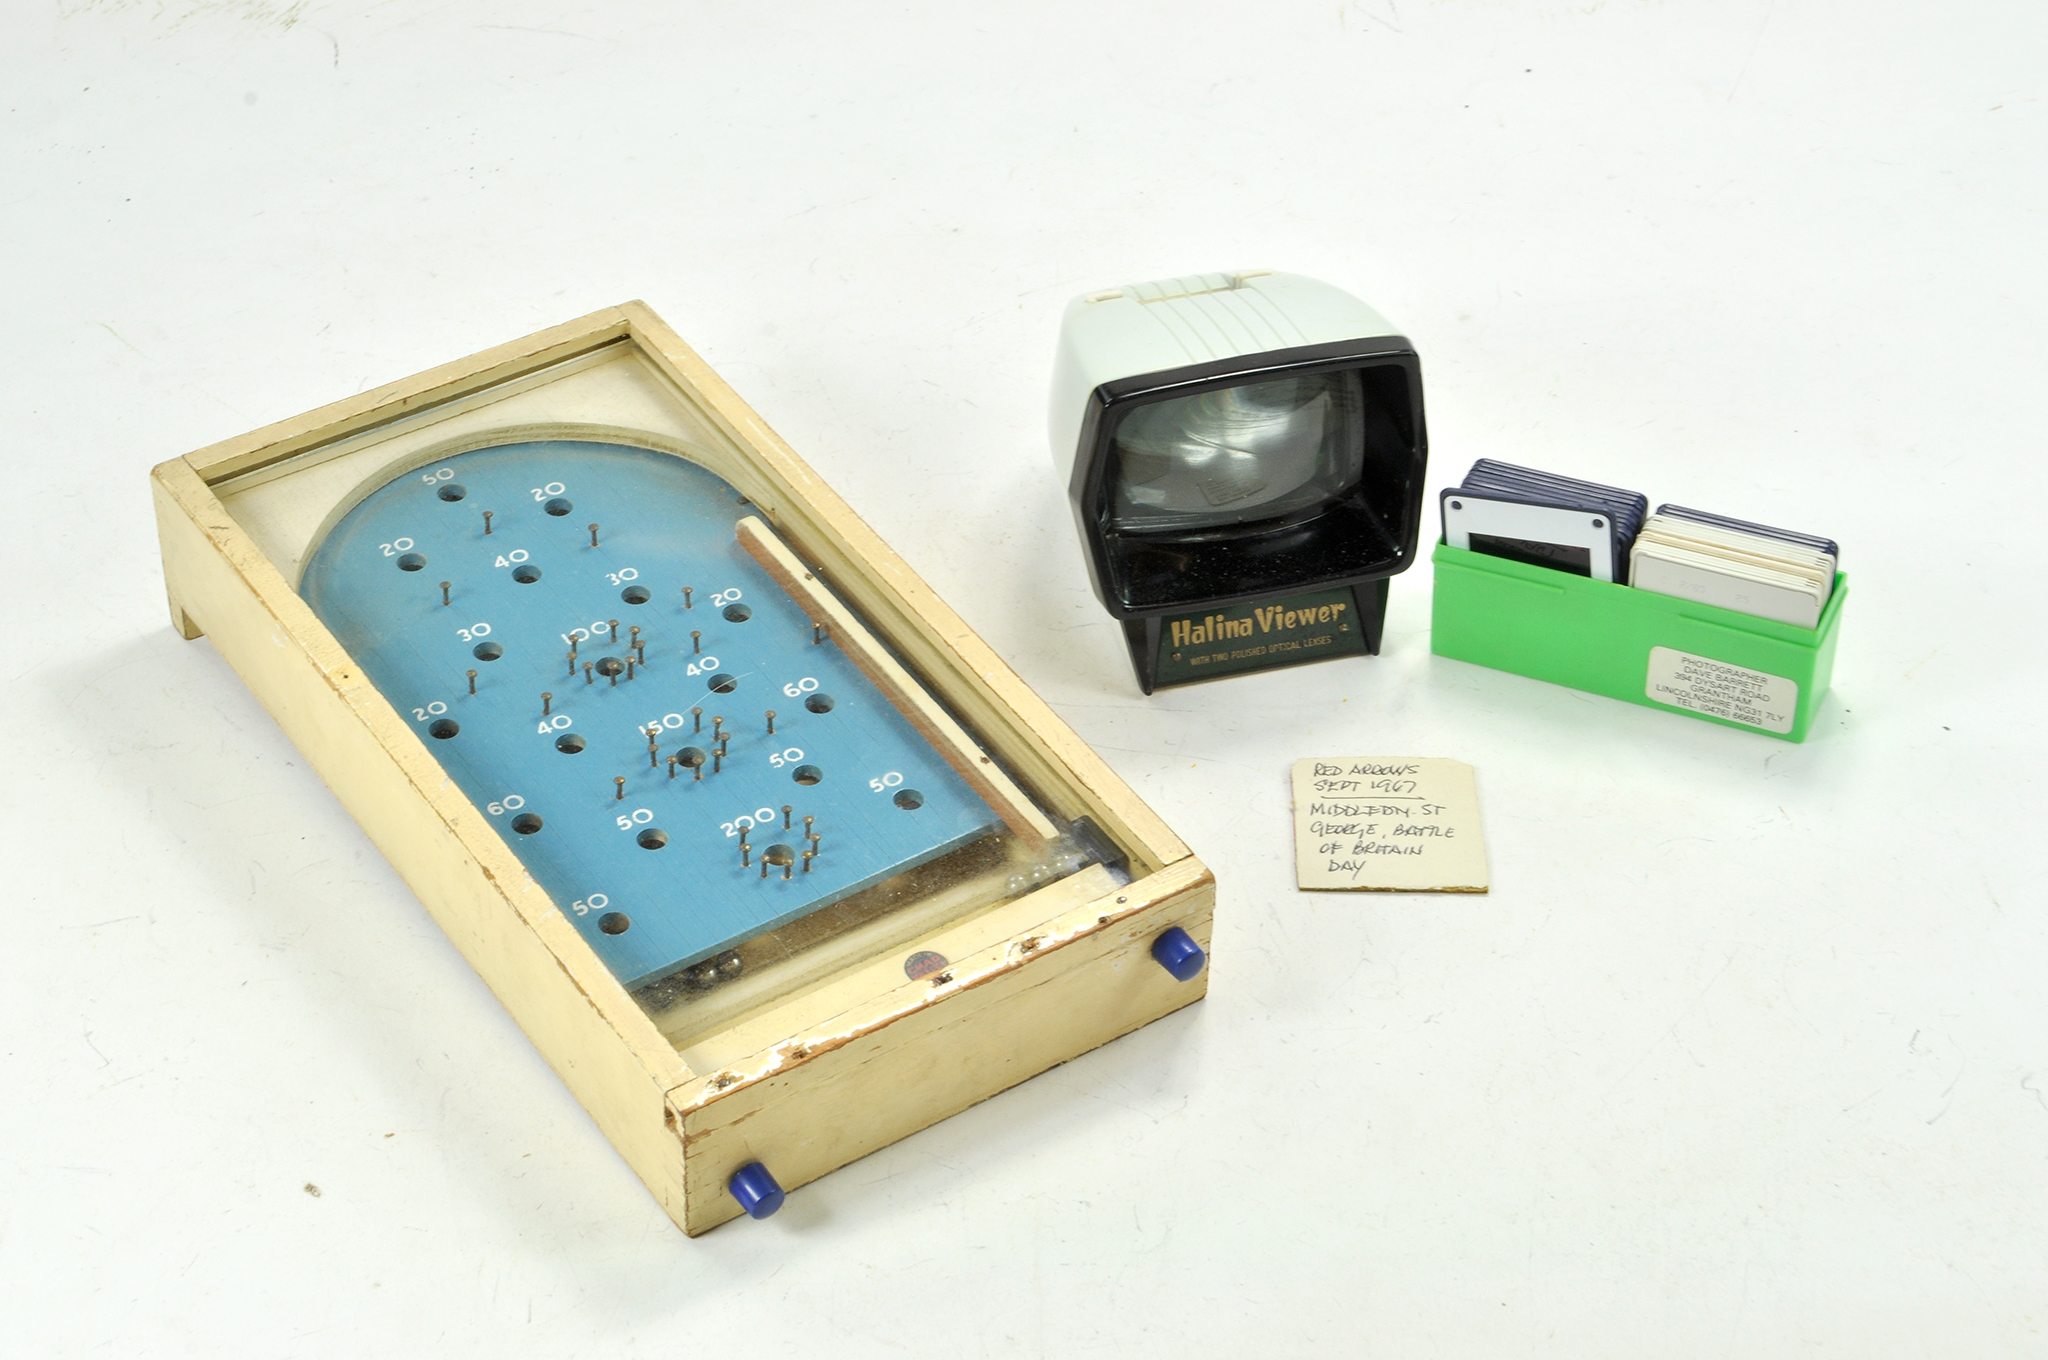 Wooden and Glass Vintage Chad Valley Bagatelle Game plus Red Arrows Image Viewer (slides) and